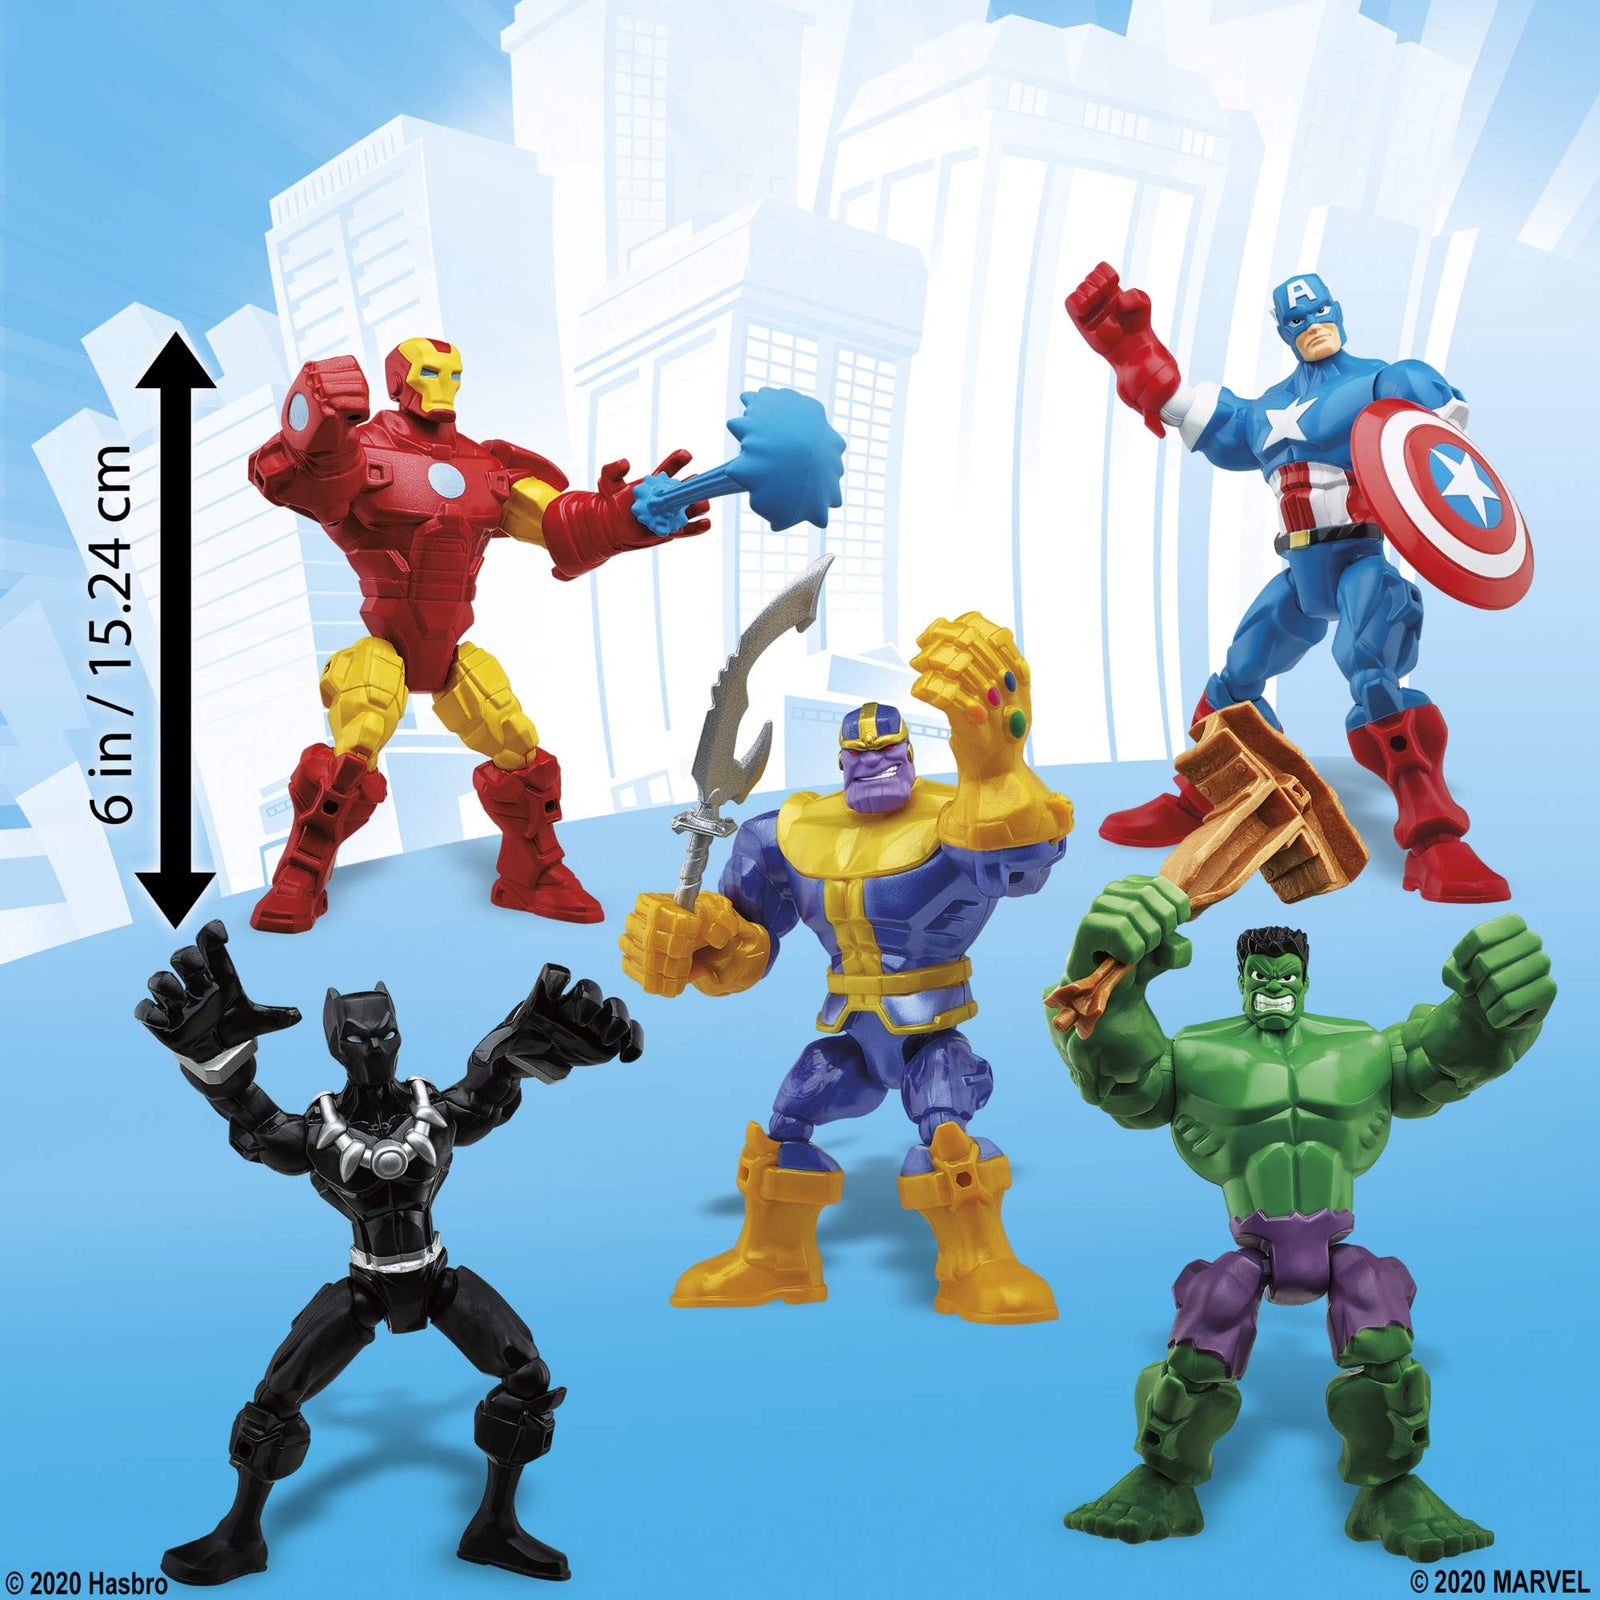 Marvel Hasbro Super Hero Mashers Battle Mash Collection Pack, Includes Iron Man, Black Panther, Thanos, Hulk, and Captain America 6-inch Figures (Amazon Exclusive)